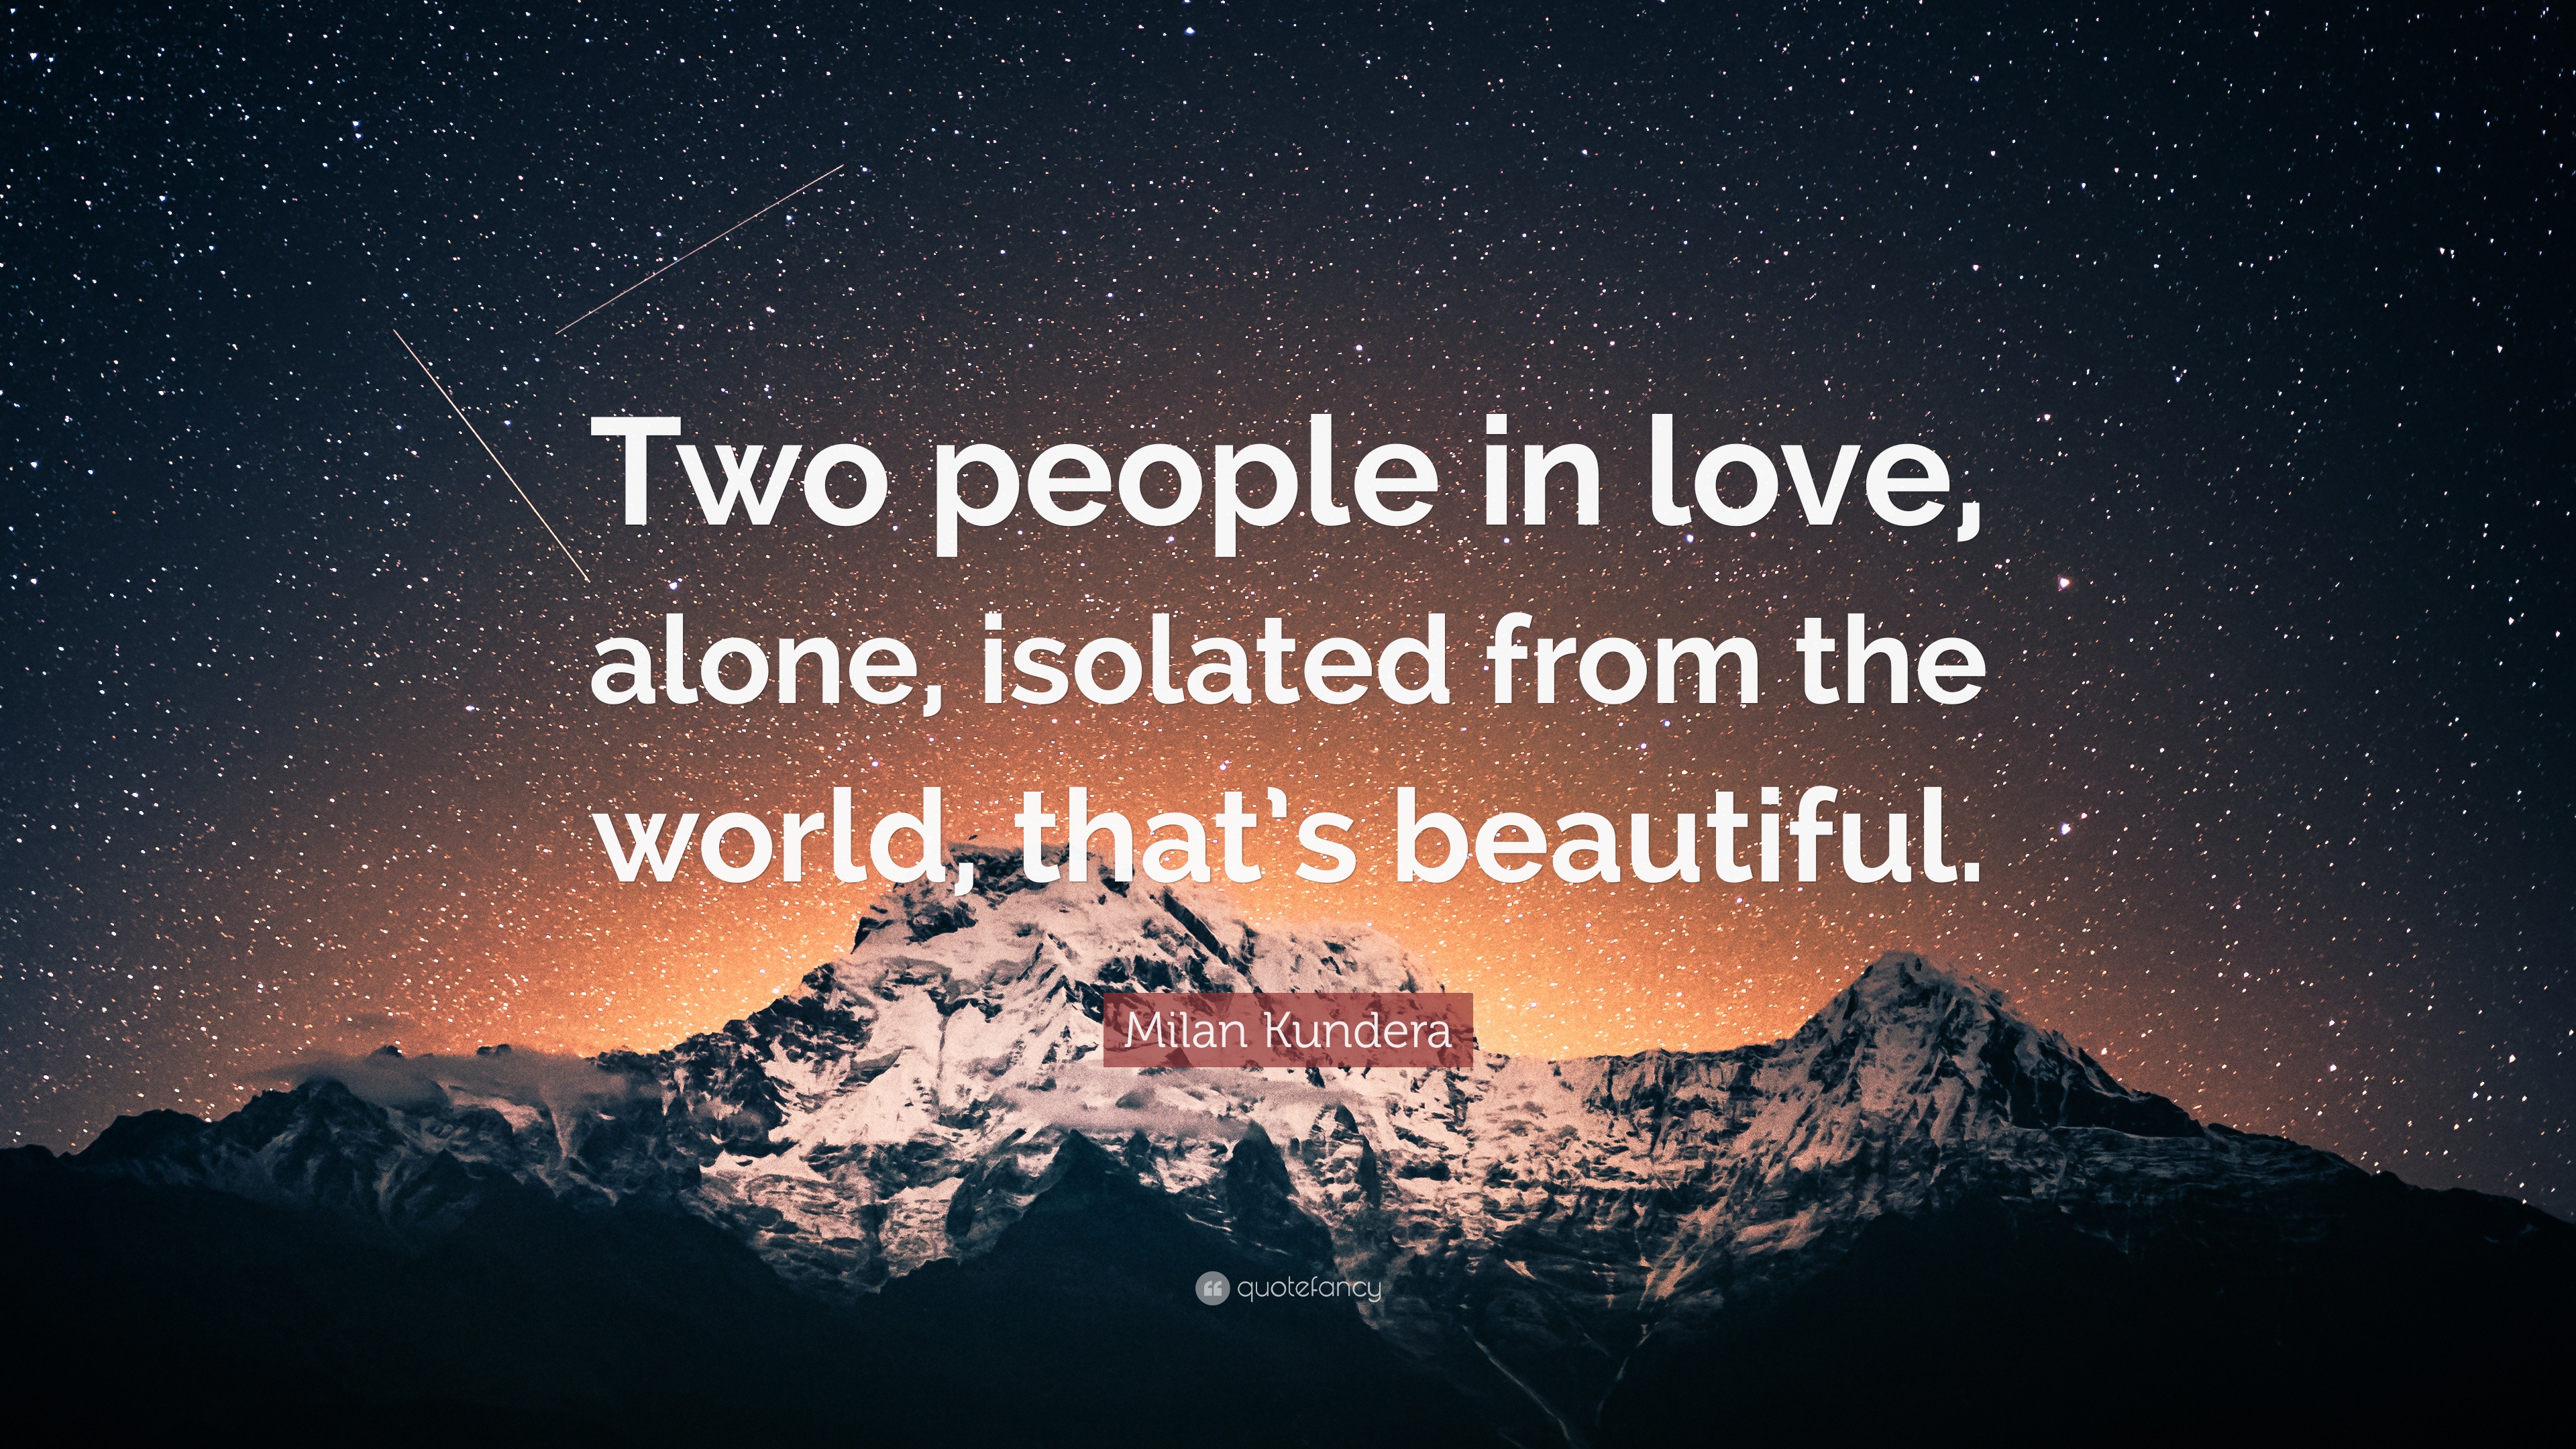 Milan Kundera Quote: “Two people in love, alone, isolated from the ...